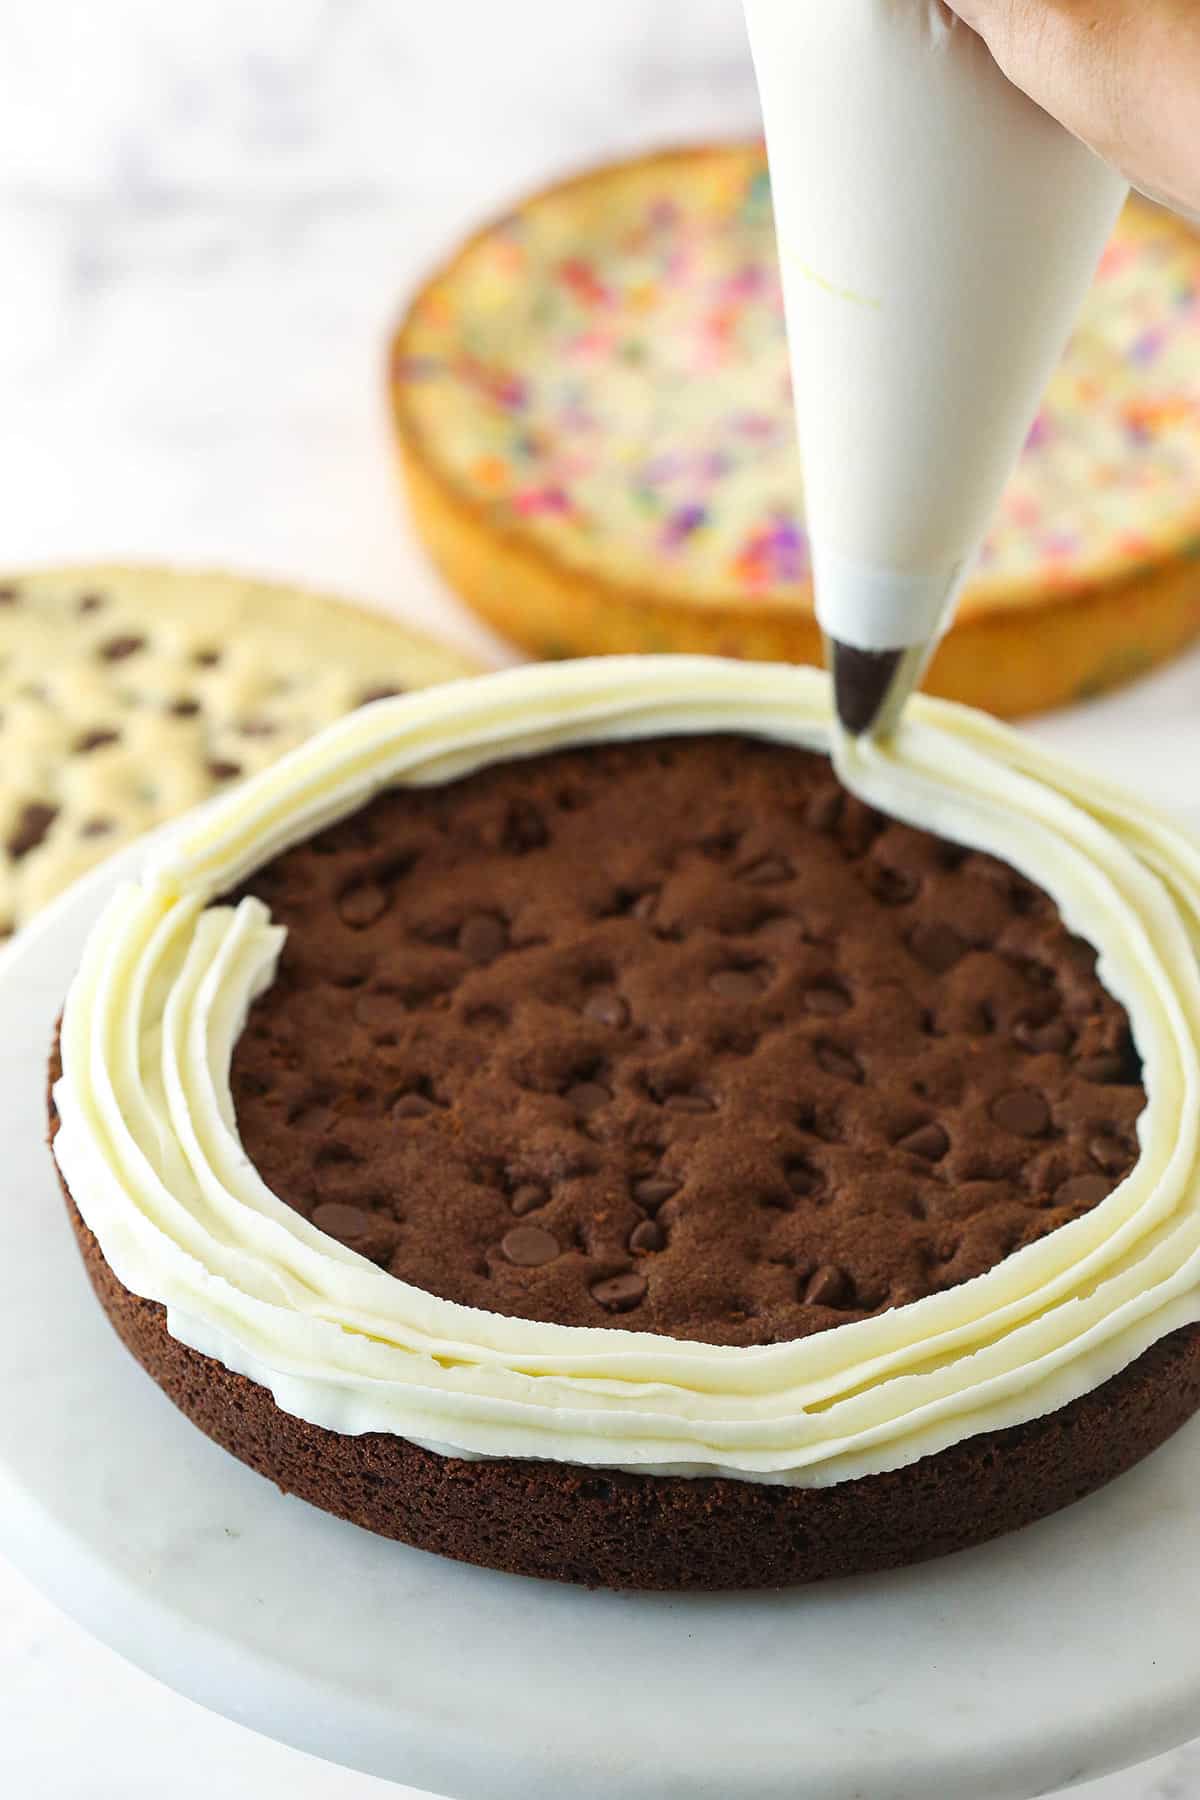 image showing the buttercream being piped onto the top of the double chocolate chip cookie cake